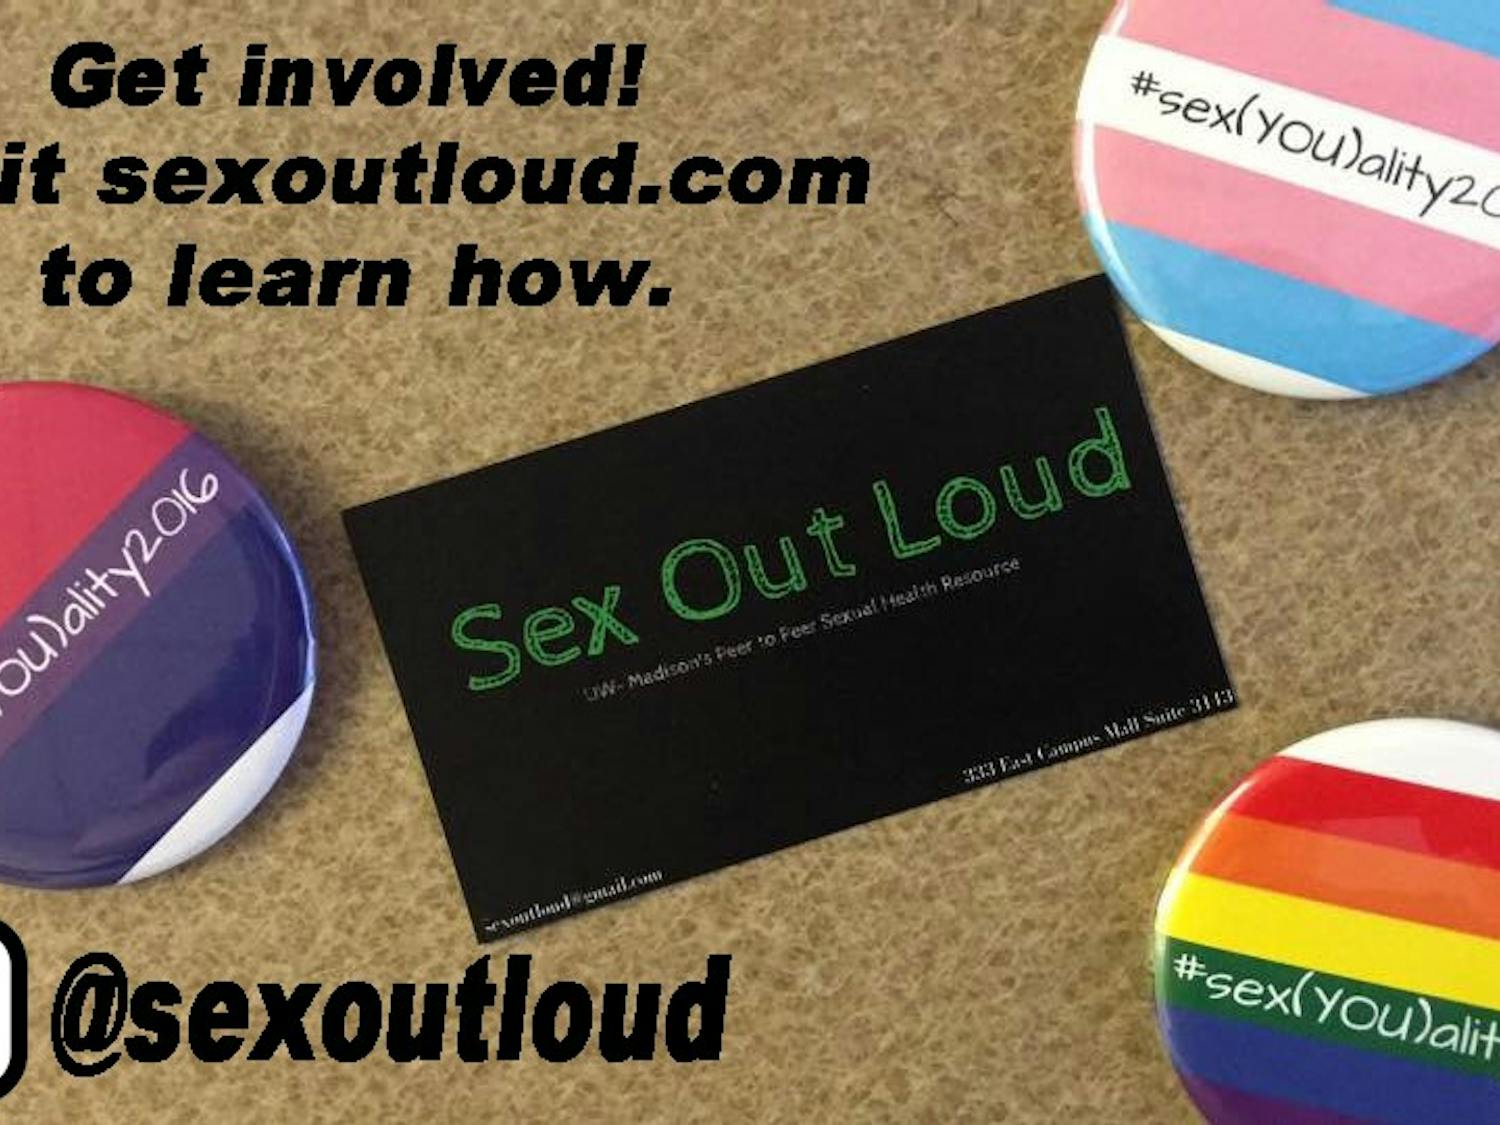 Sex Out Loud offers tons of opportunities for UW students to get involved and help spread the word about having safe sex.